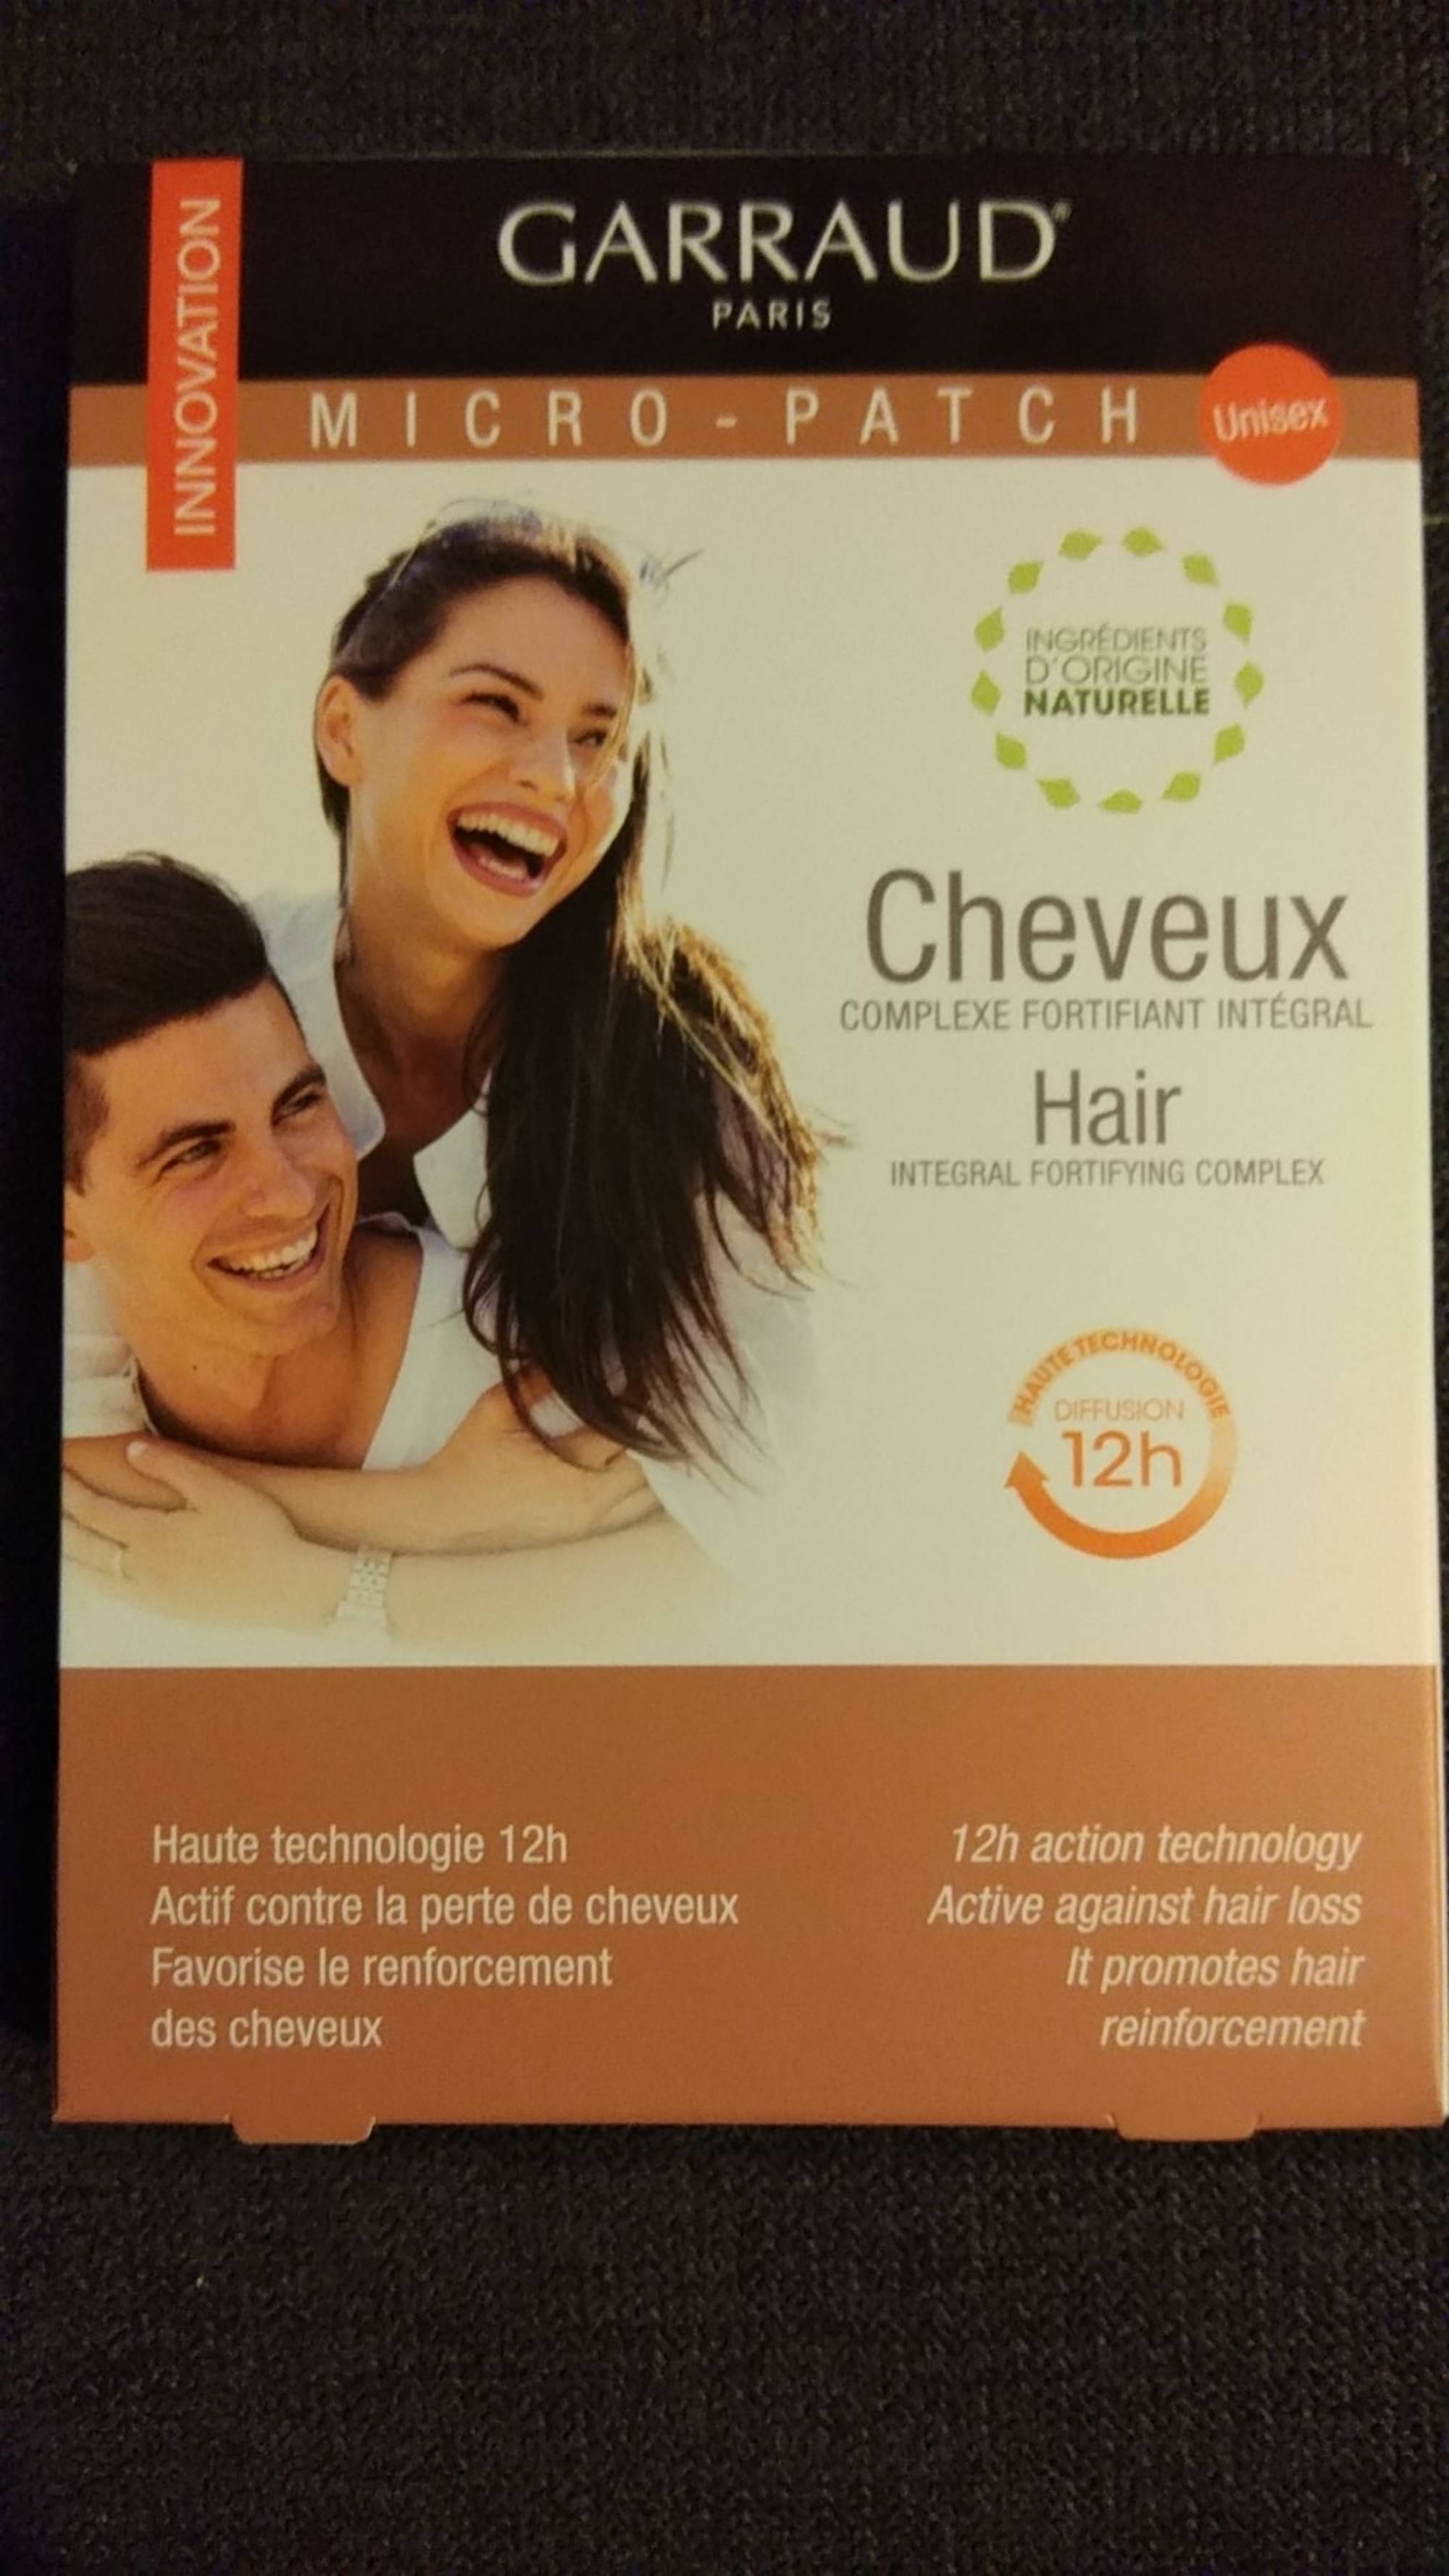 GARRAUD - Micro-patch - Complexe fortifiant intégral cheveux 